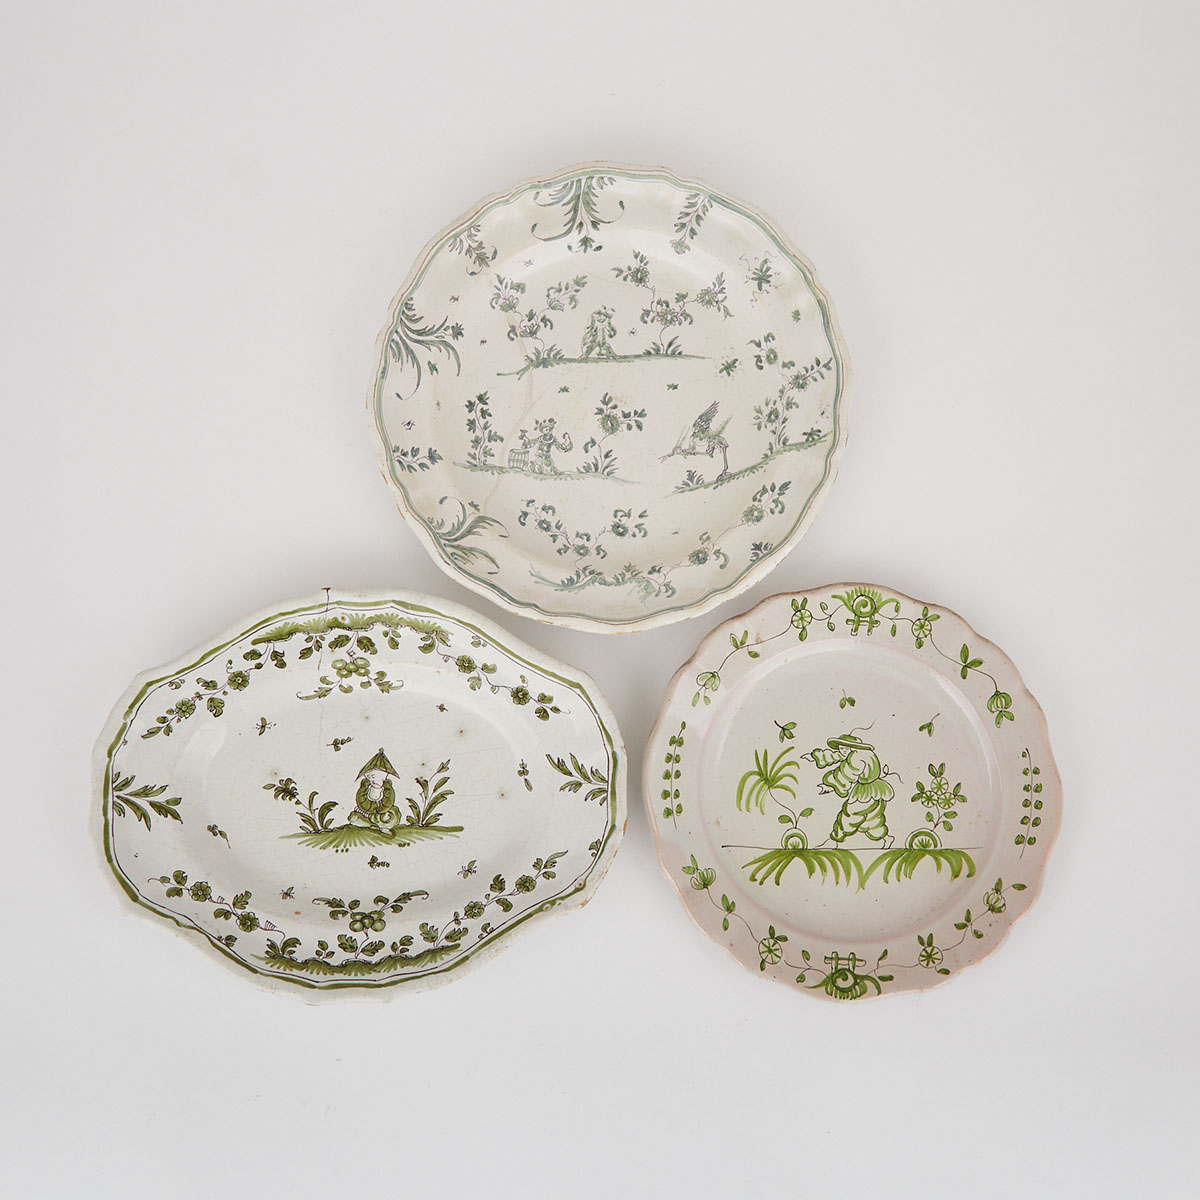 Three French Green and Manganese Painted Faience Dishes, late 18th century